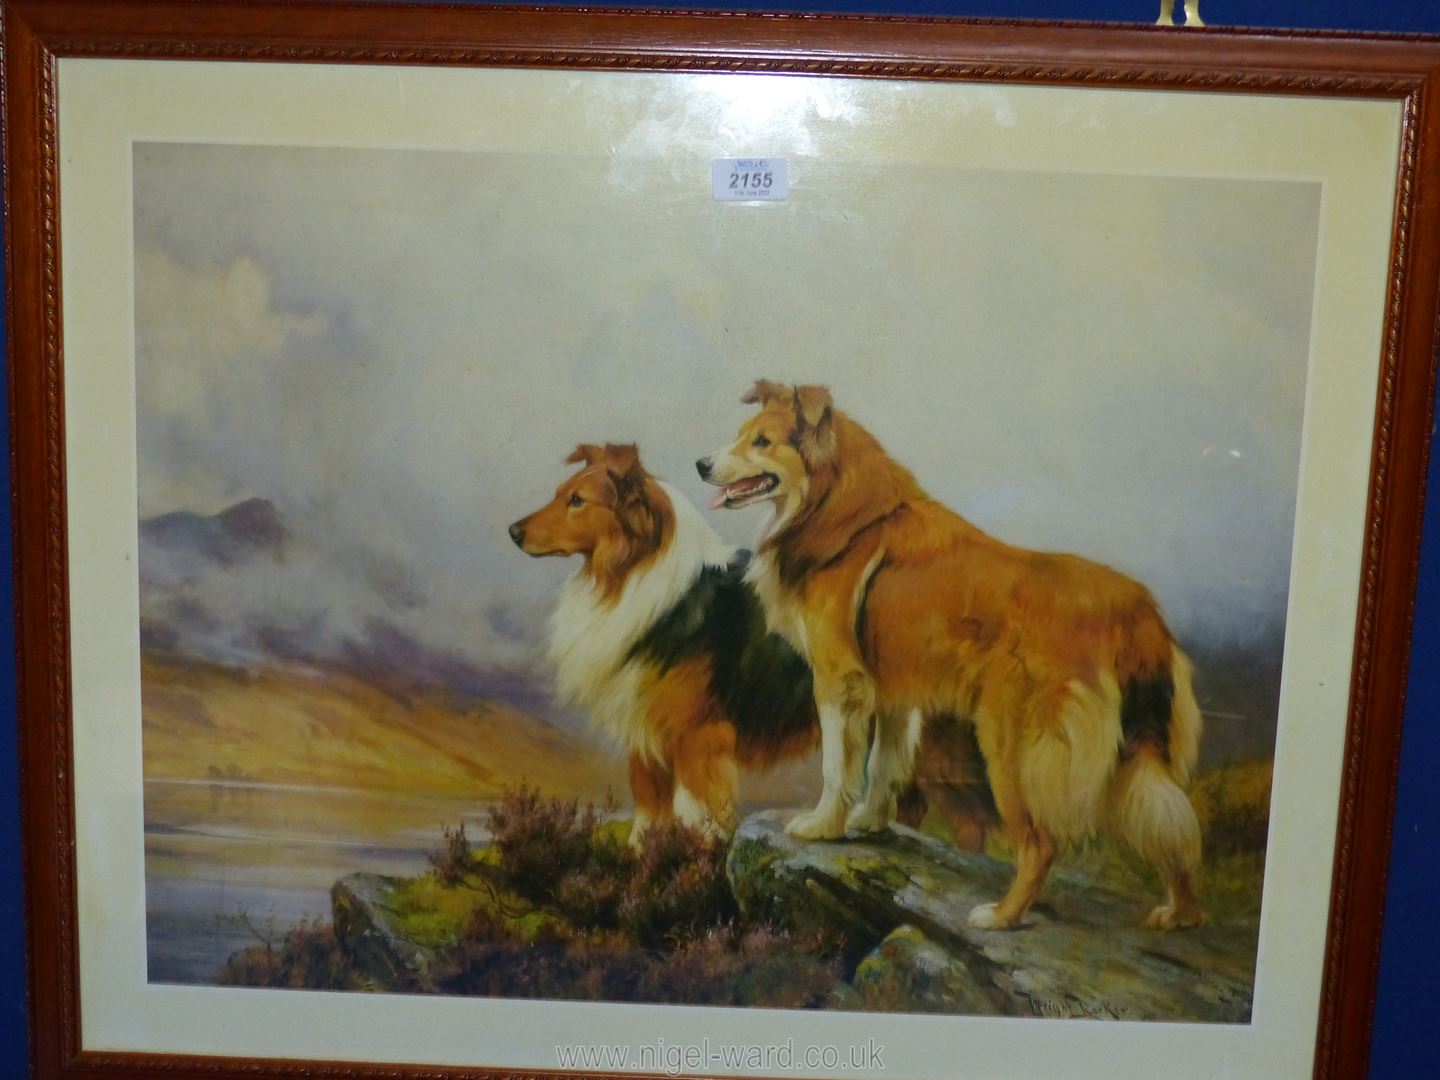 A large framed Print by Wright Barker 'Collies in a highland landscape' 29 1/4" x 24".